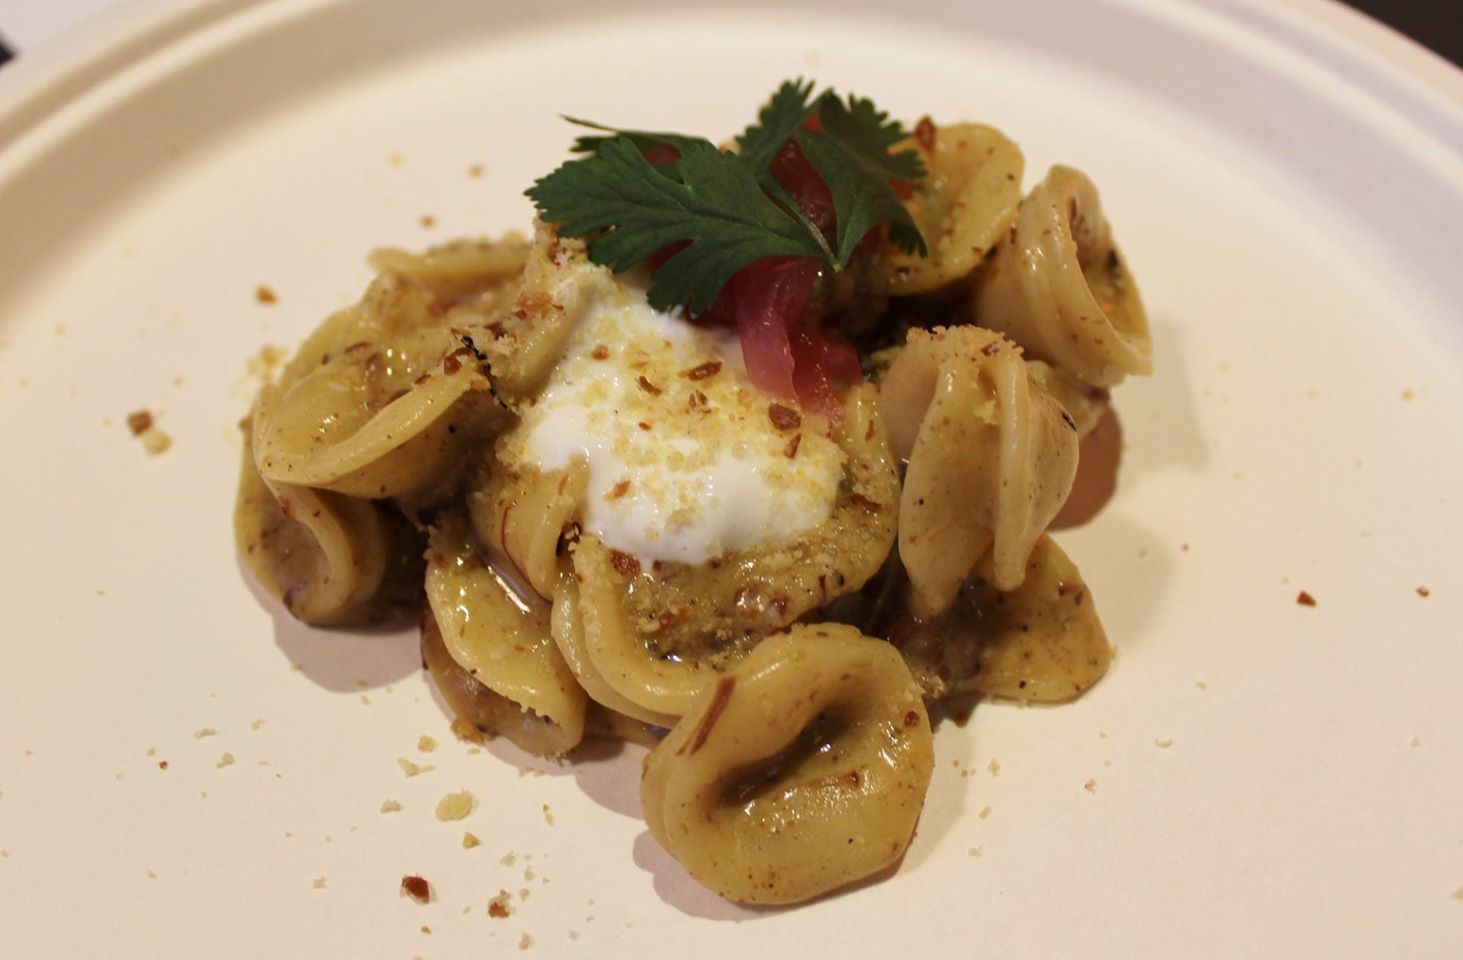 Pink Pony's orecchiette with green chili pork, beer cheese, quark, and pickled onions